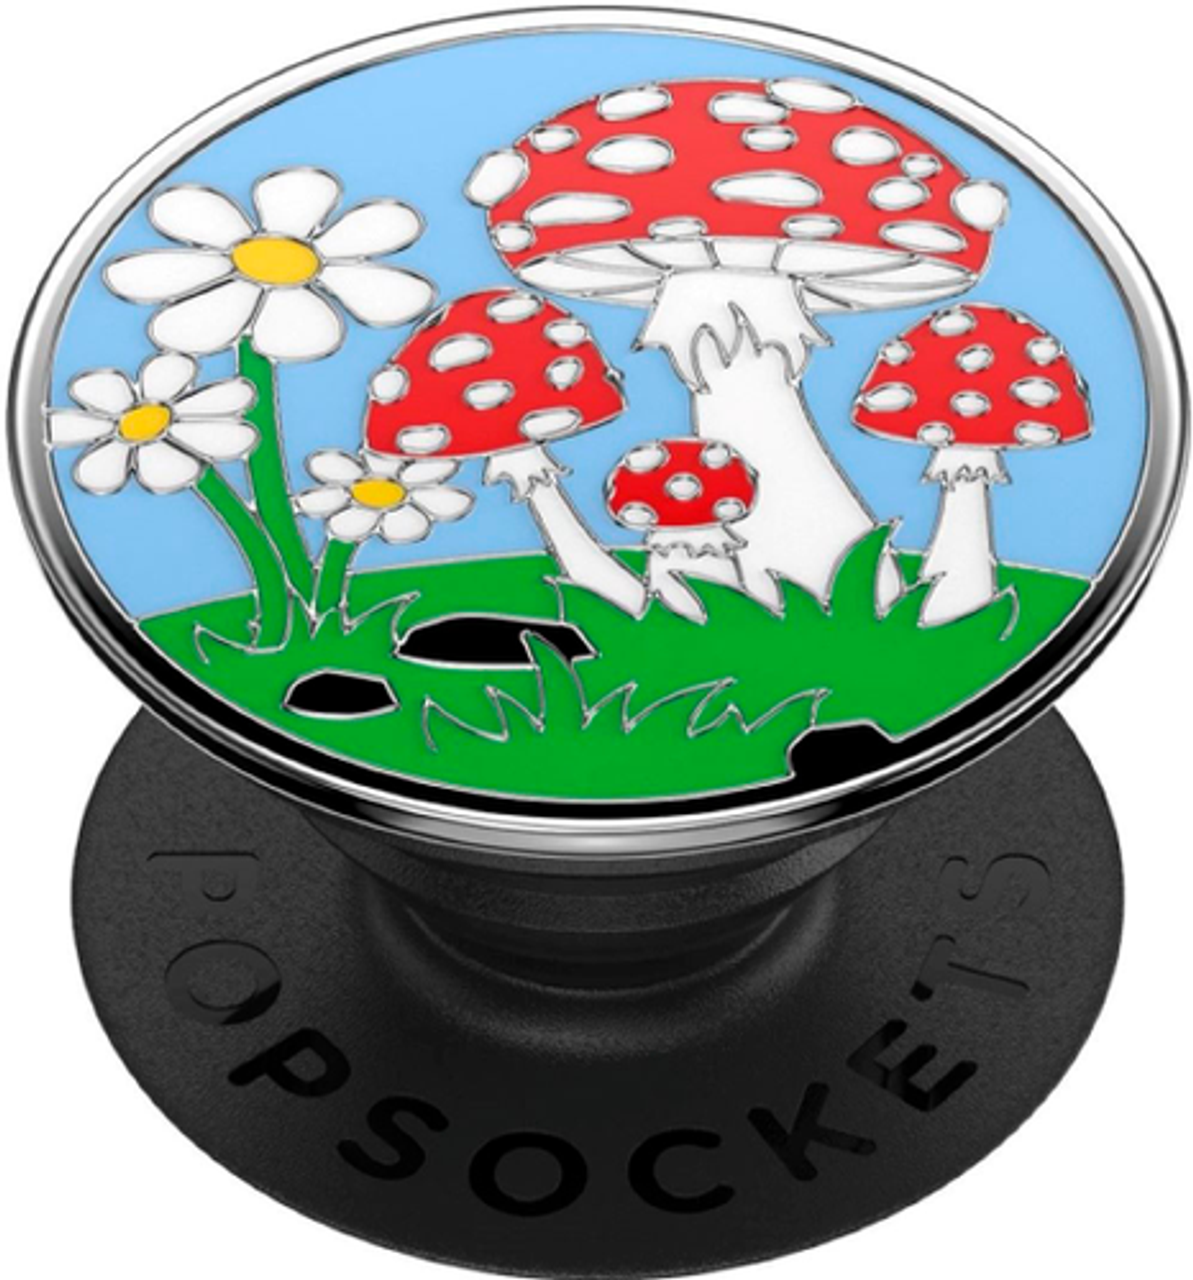 PopSockets - PopGrip Cell Phone Grip & Stand - Fun Guy - Blue, Green, White and Red